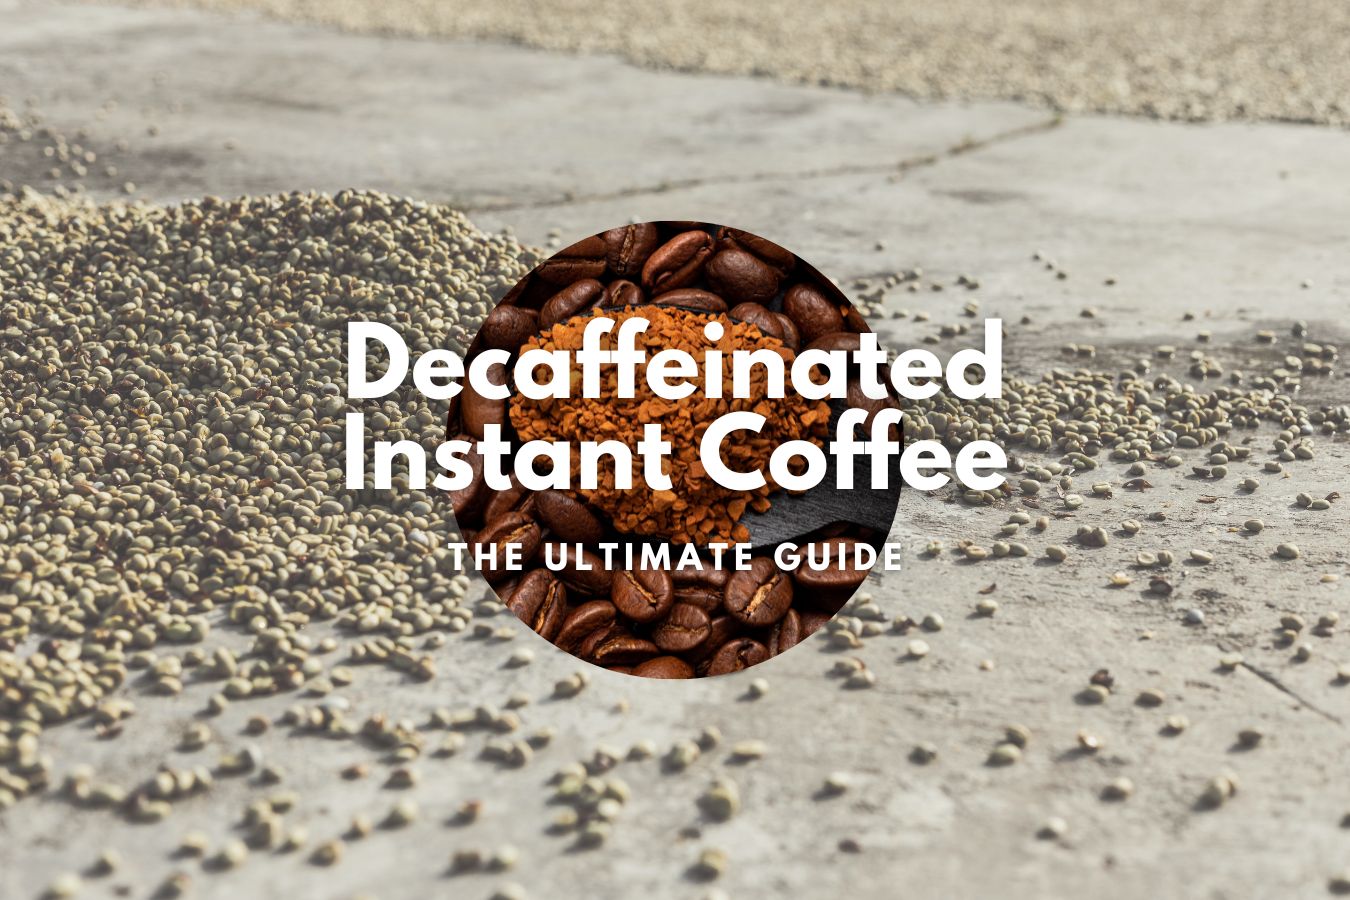 The Ultimate Guide to Decaffeinated Instant Coffee